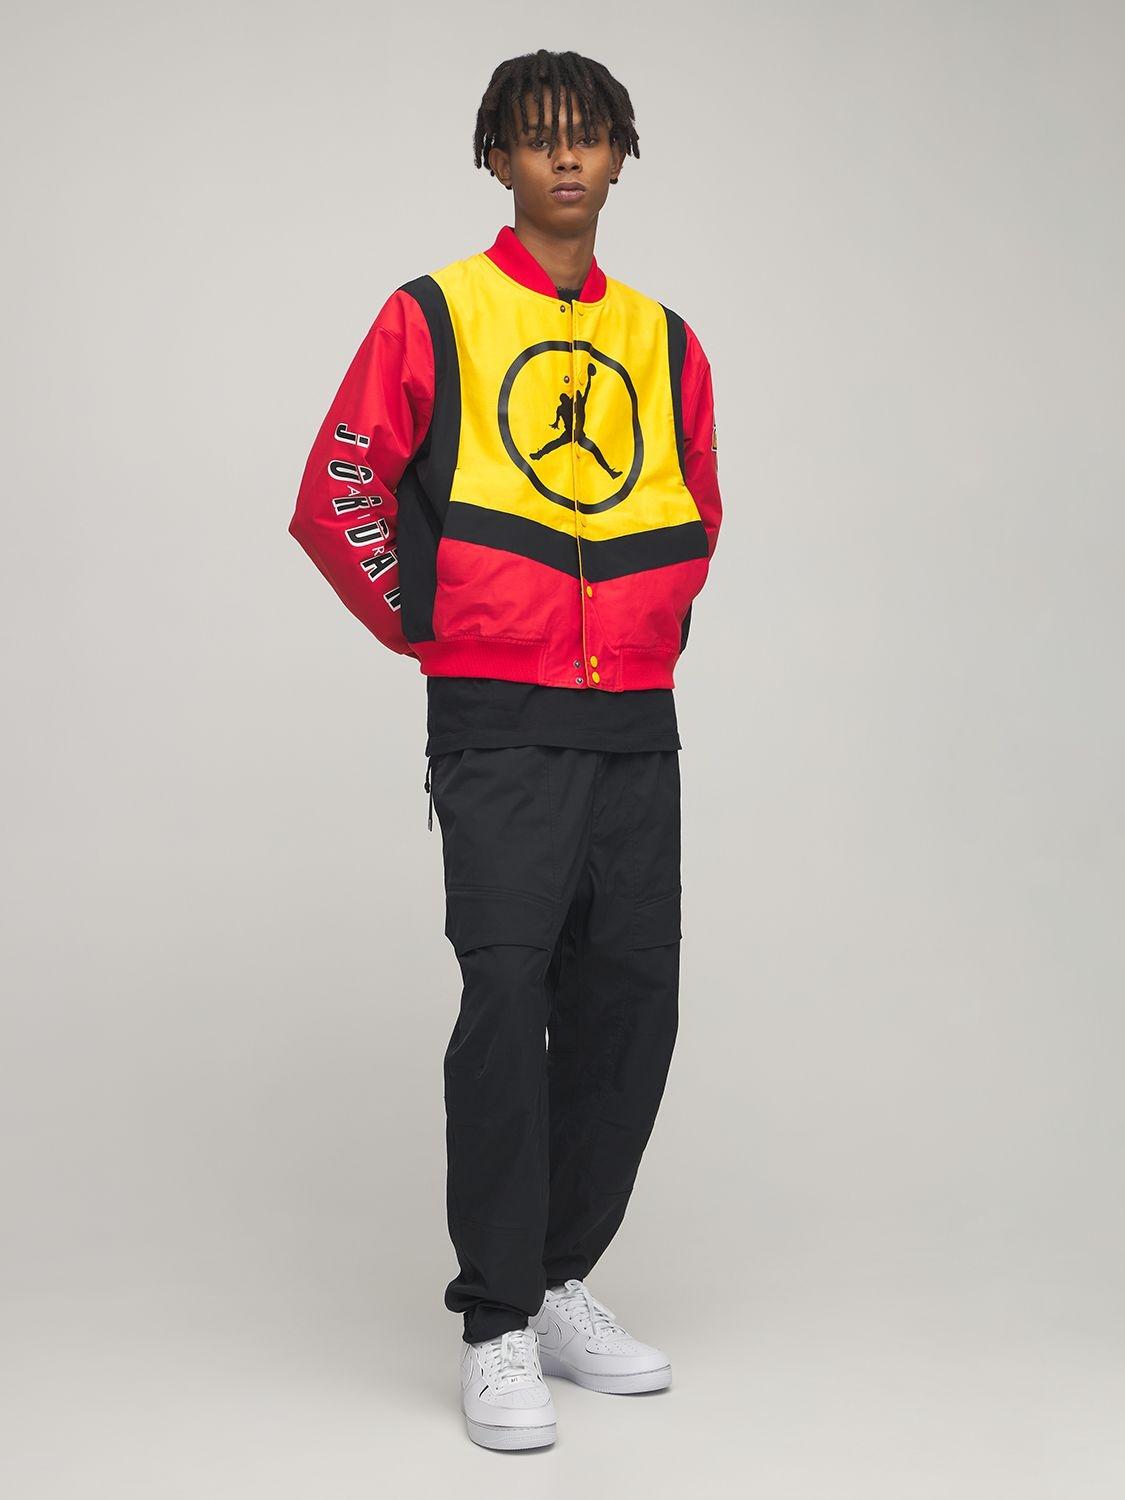 Nike Jordan Sport Dna Bomber Jacket in Red/Yellow (Yellow) for 